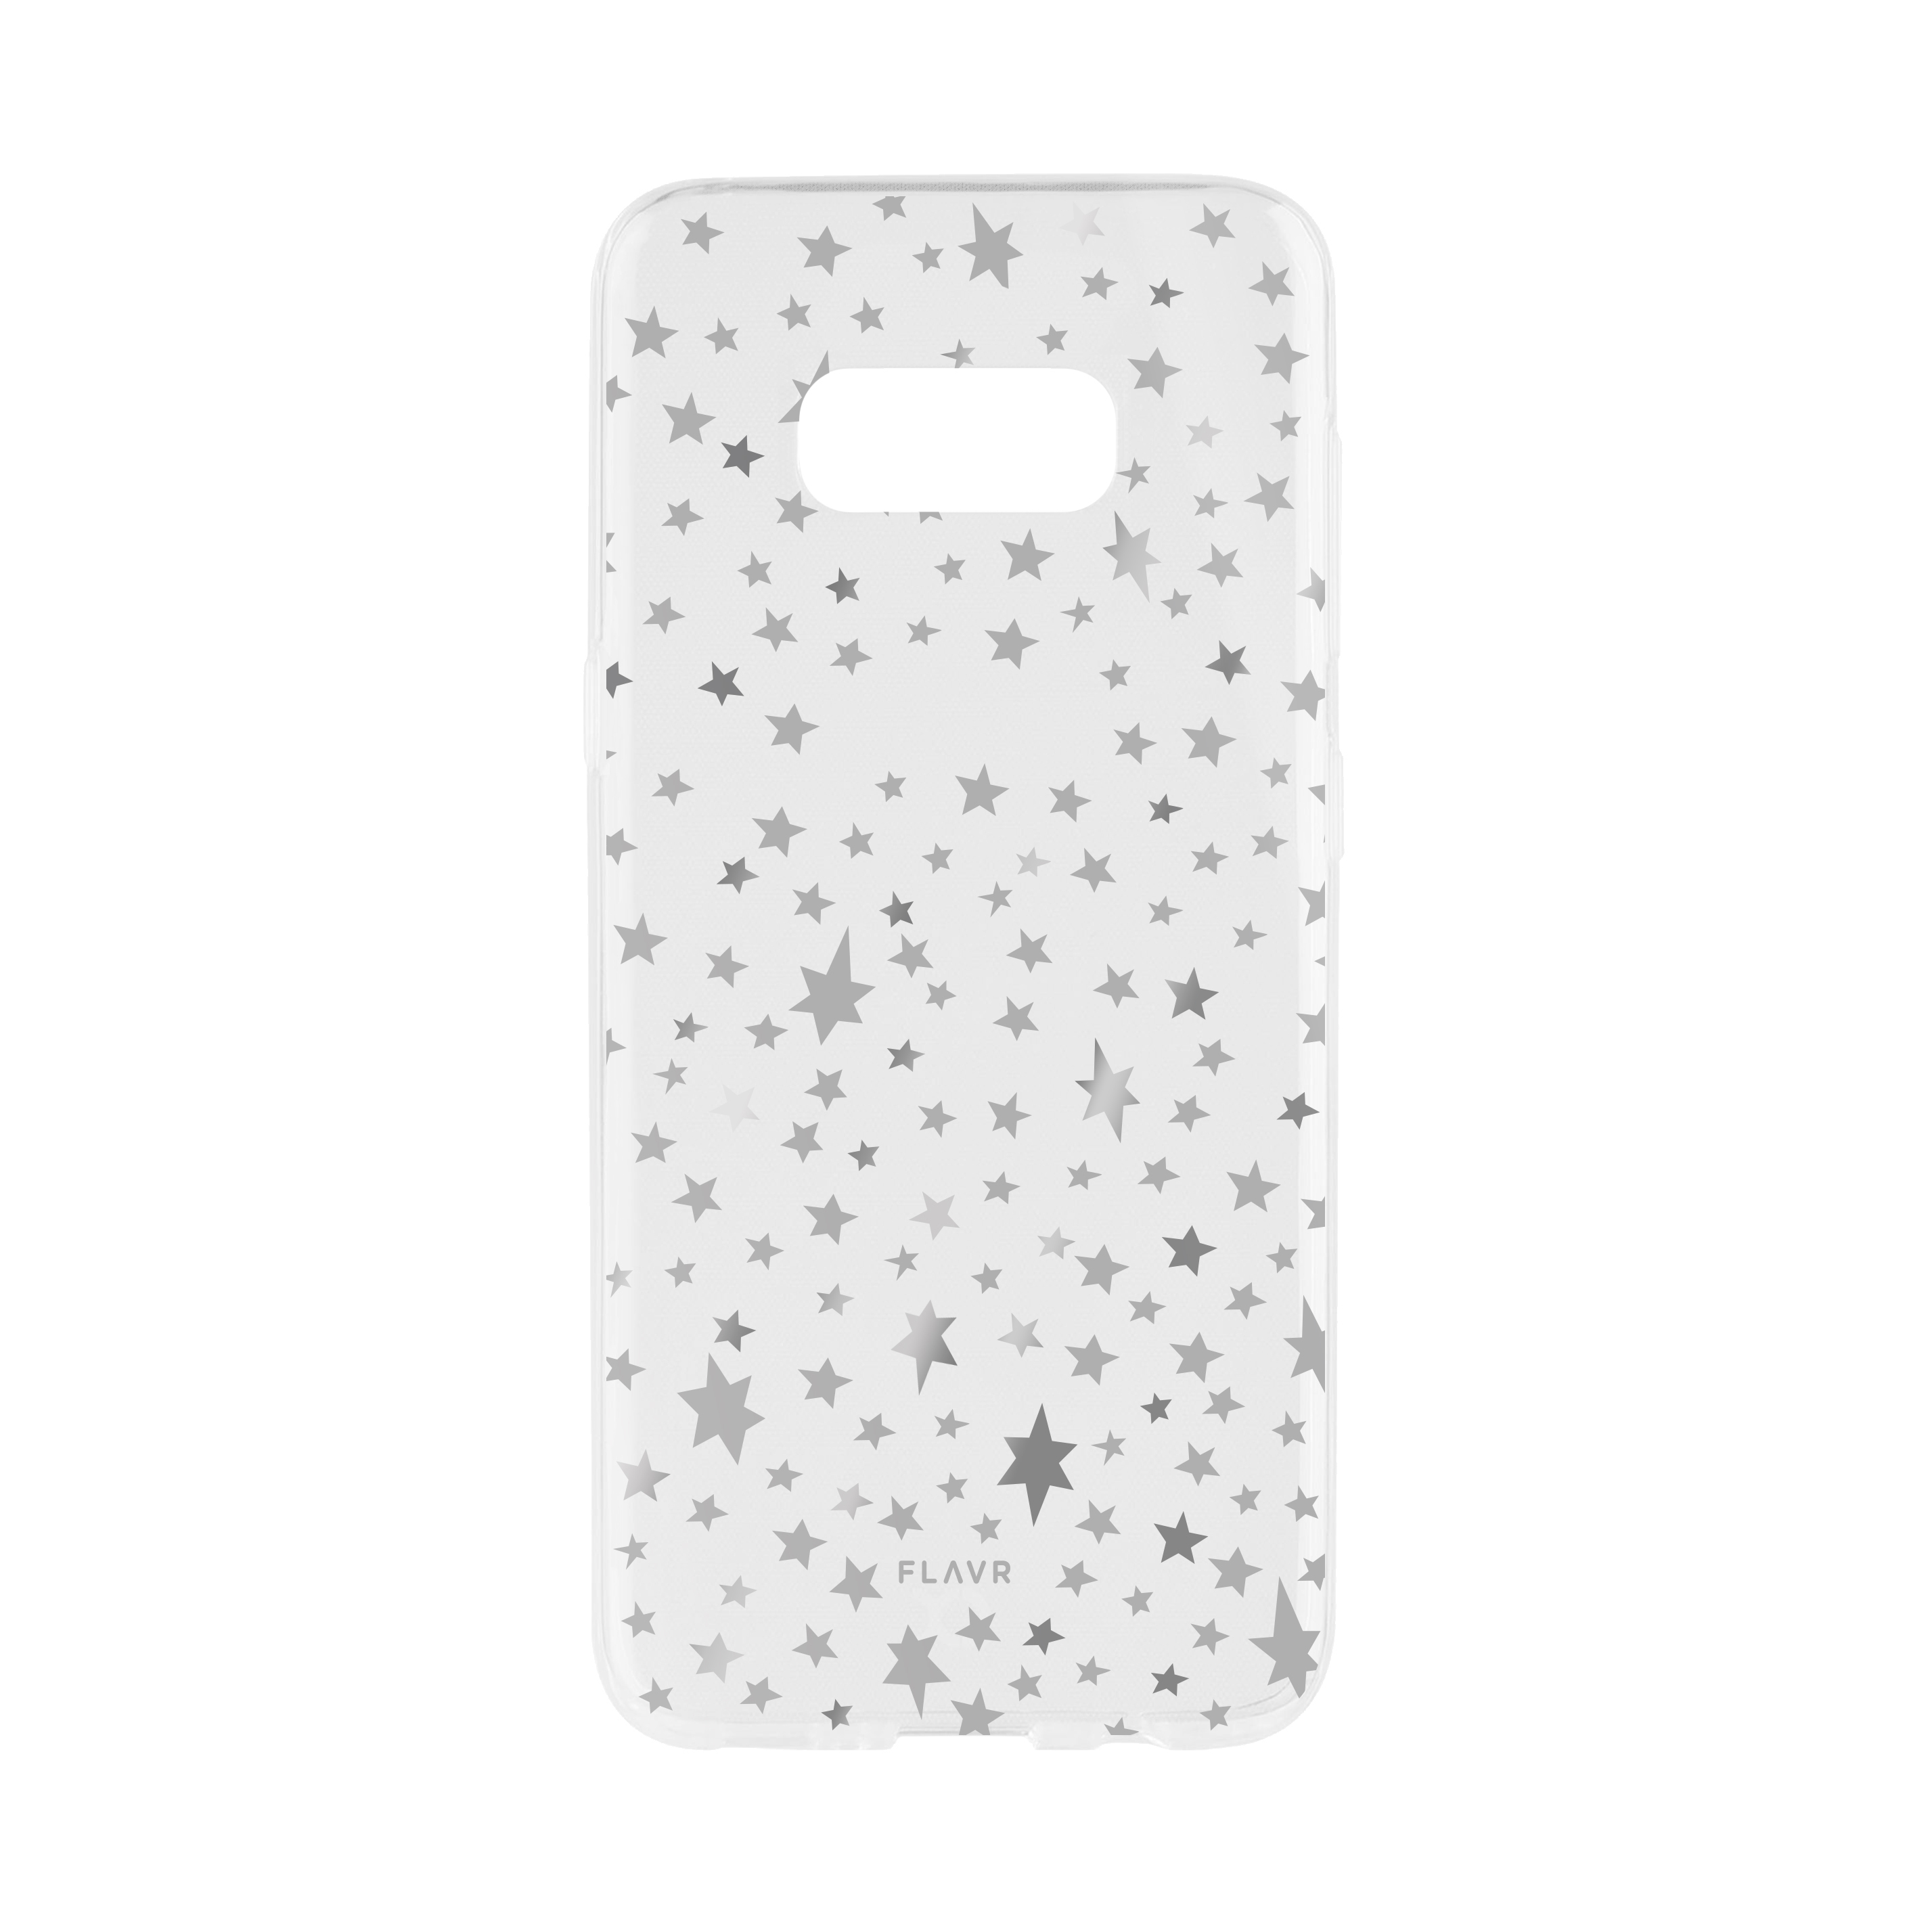 iPlate Starry GALAXY FLAVR Nights, COLOURFUL SAMSUNG, NOTE Backcover, 8,